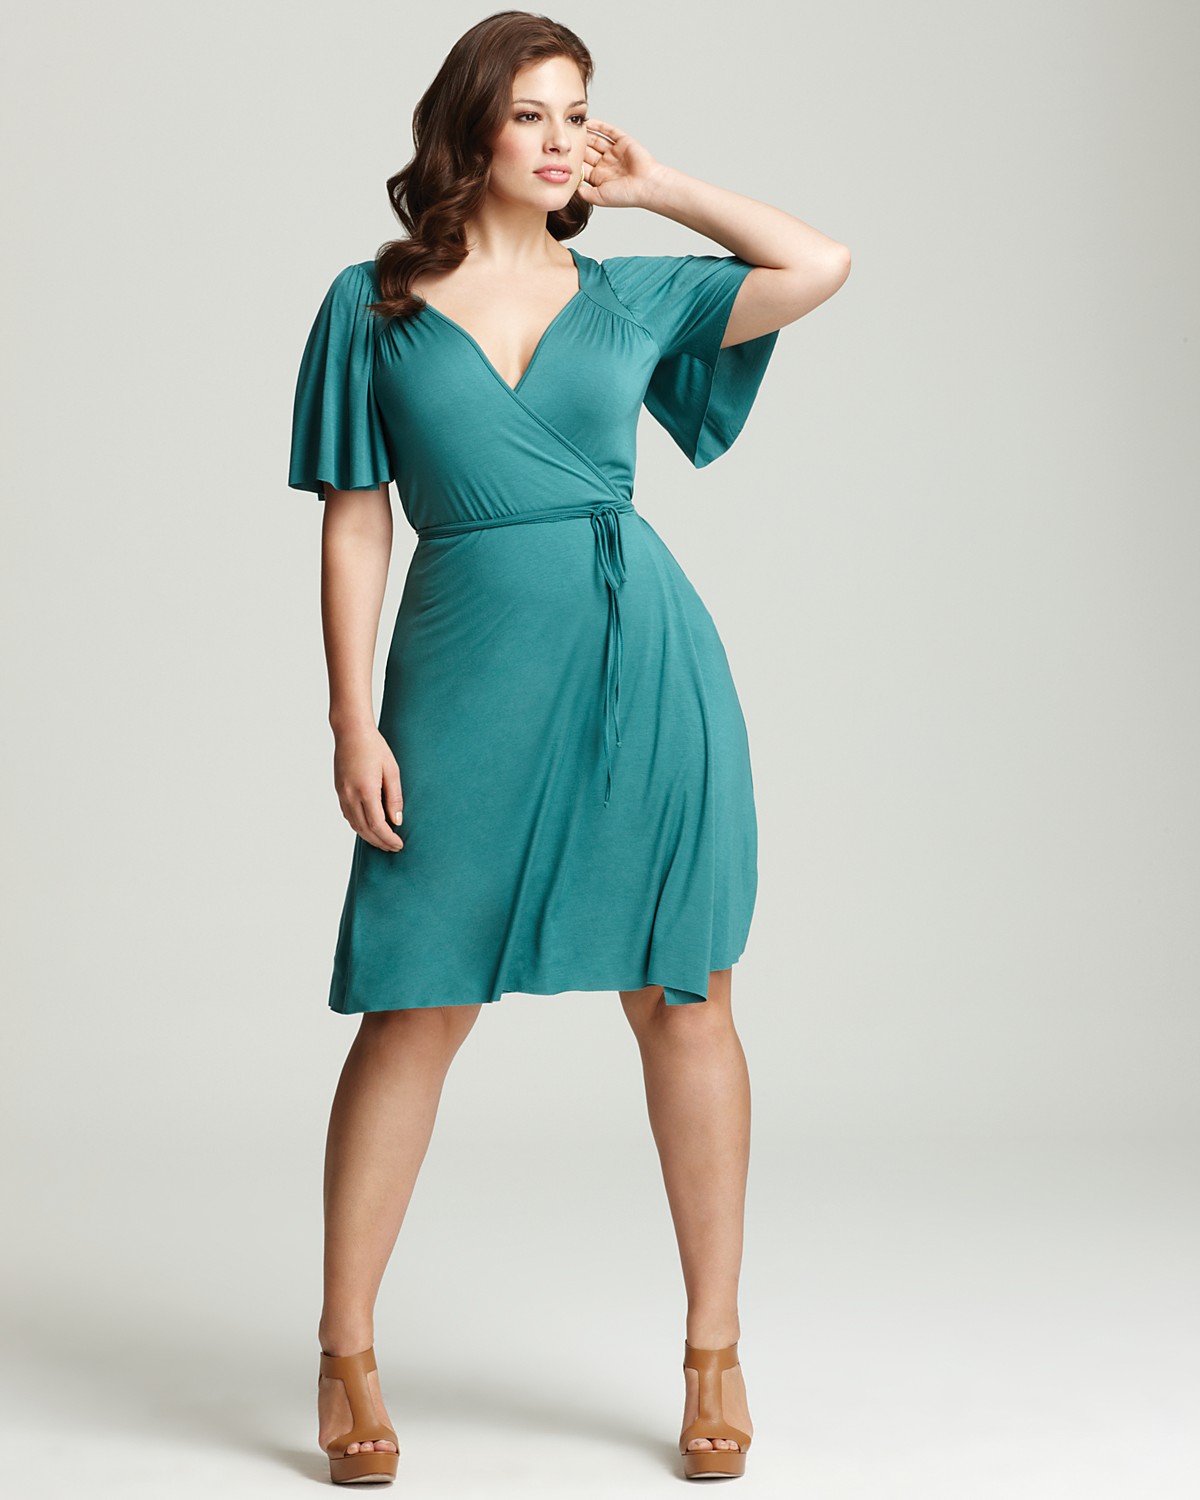 Top 104+ Pictures Plus Size Dresses That Make You Look Slimmer Full HD ...